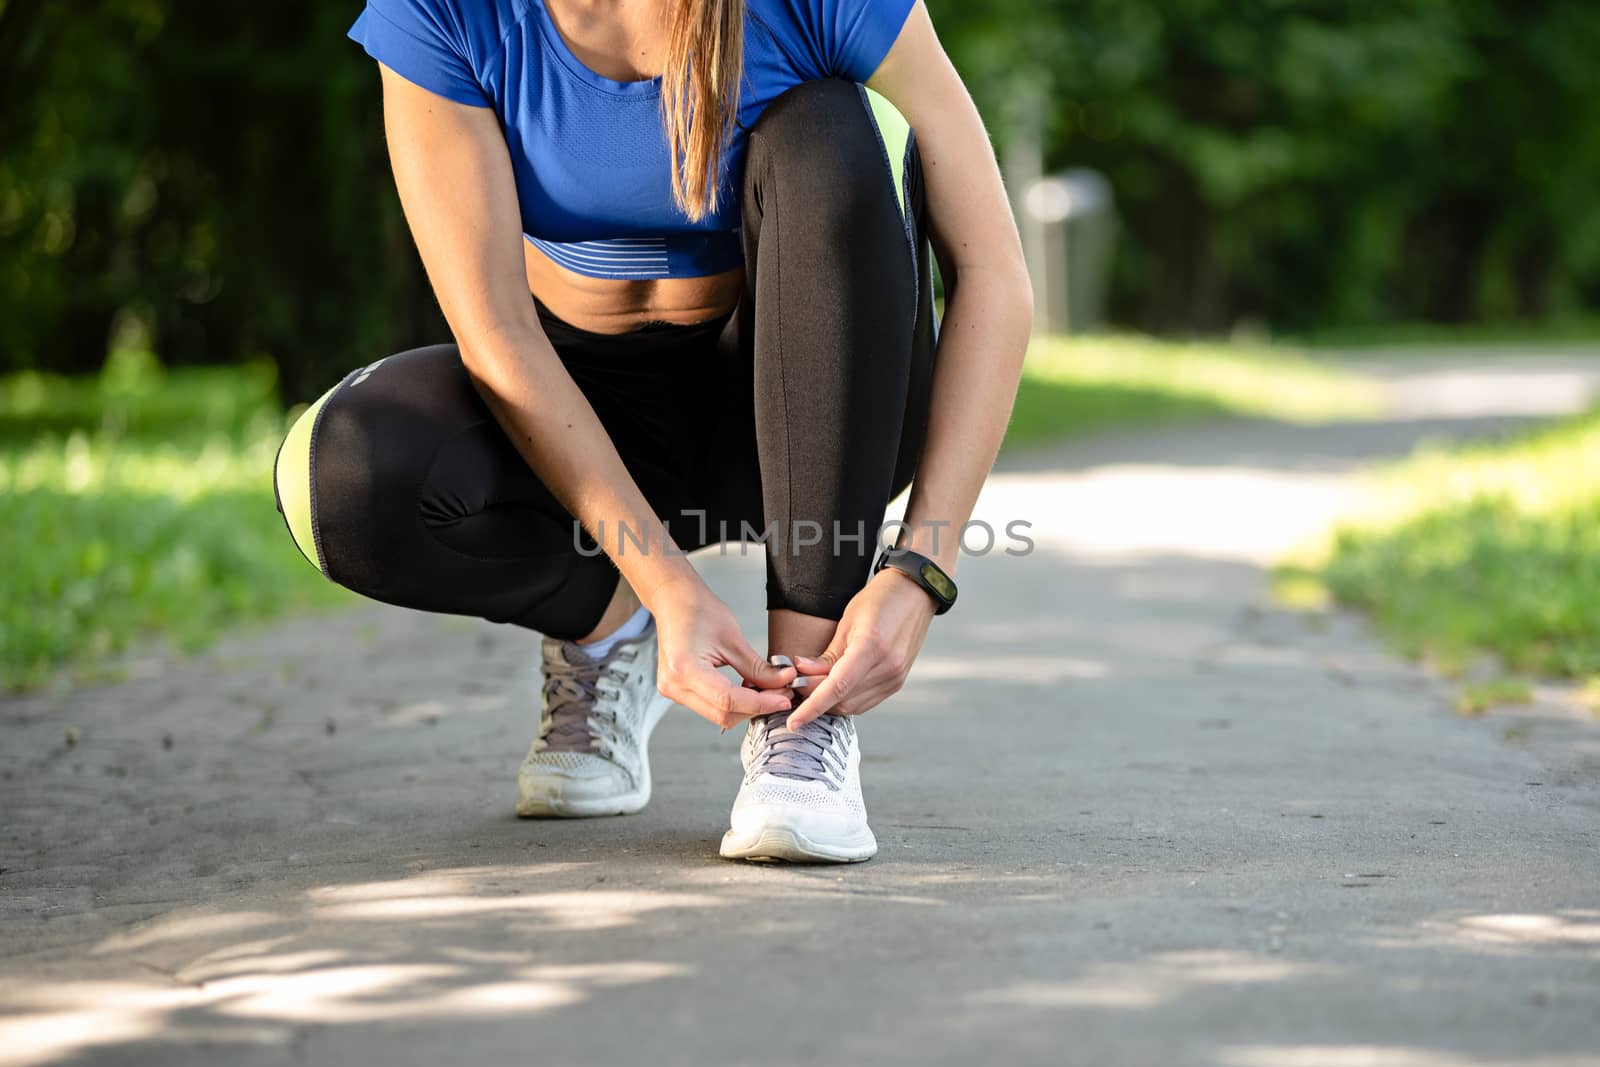 Fitness woman tying laces in running shoes during outdoors workout in the park on a sunny morning